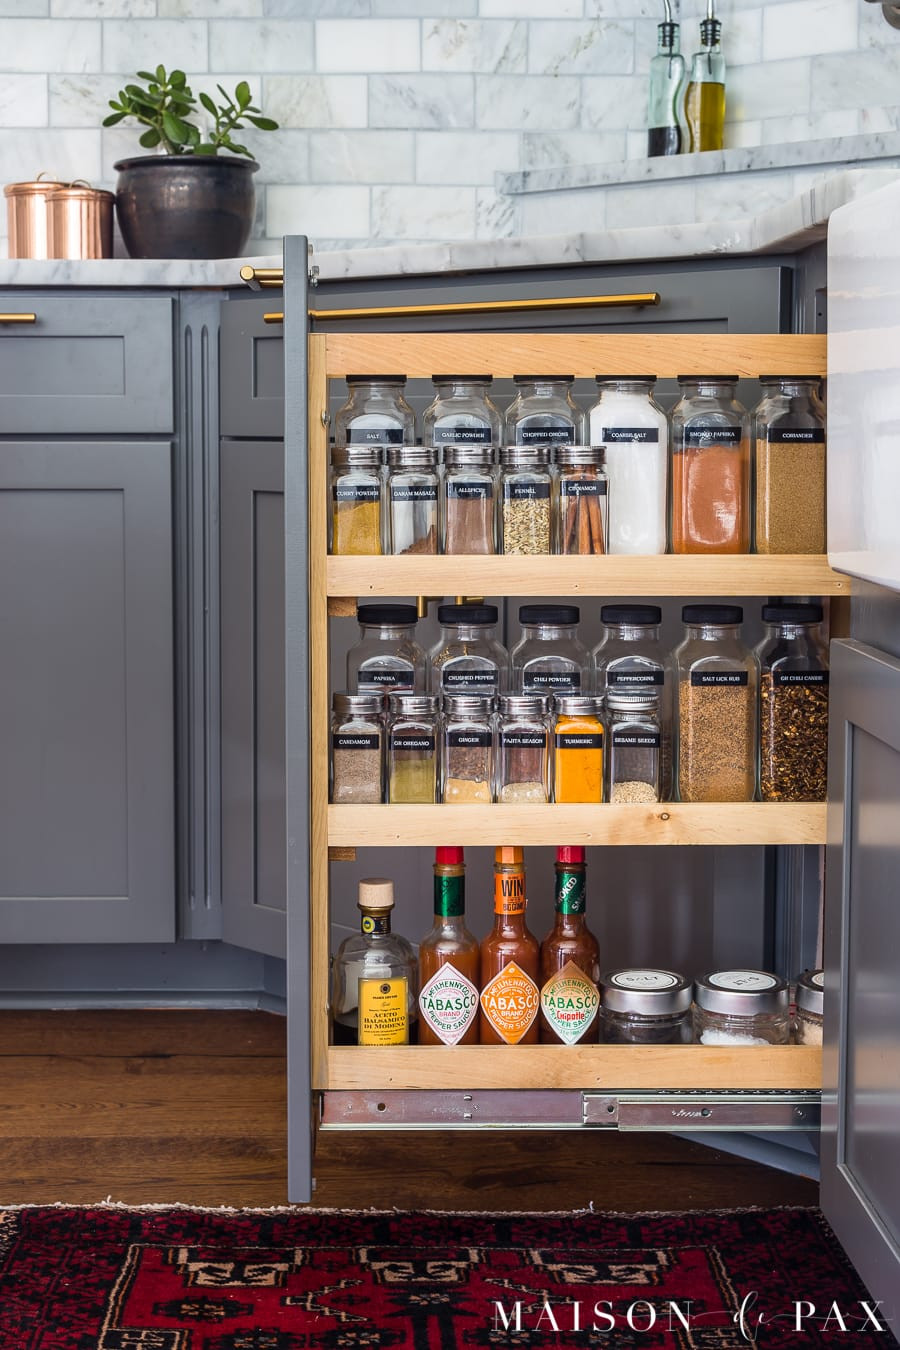 Kitchen Organization Tips
 Kitchen Organization Principles for a Beautiful